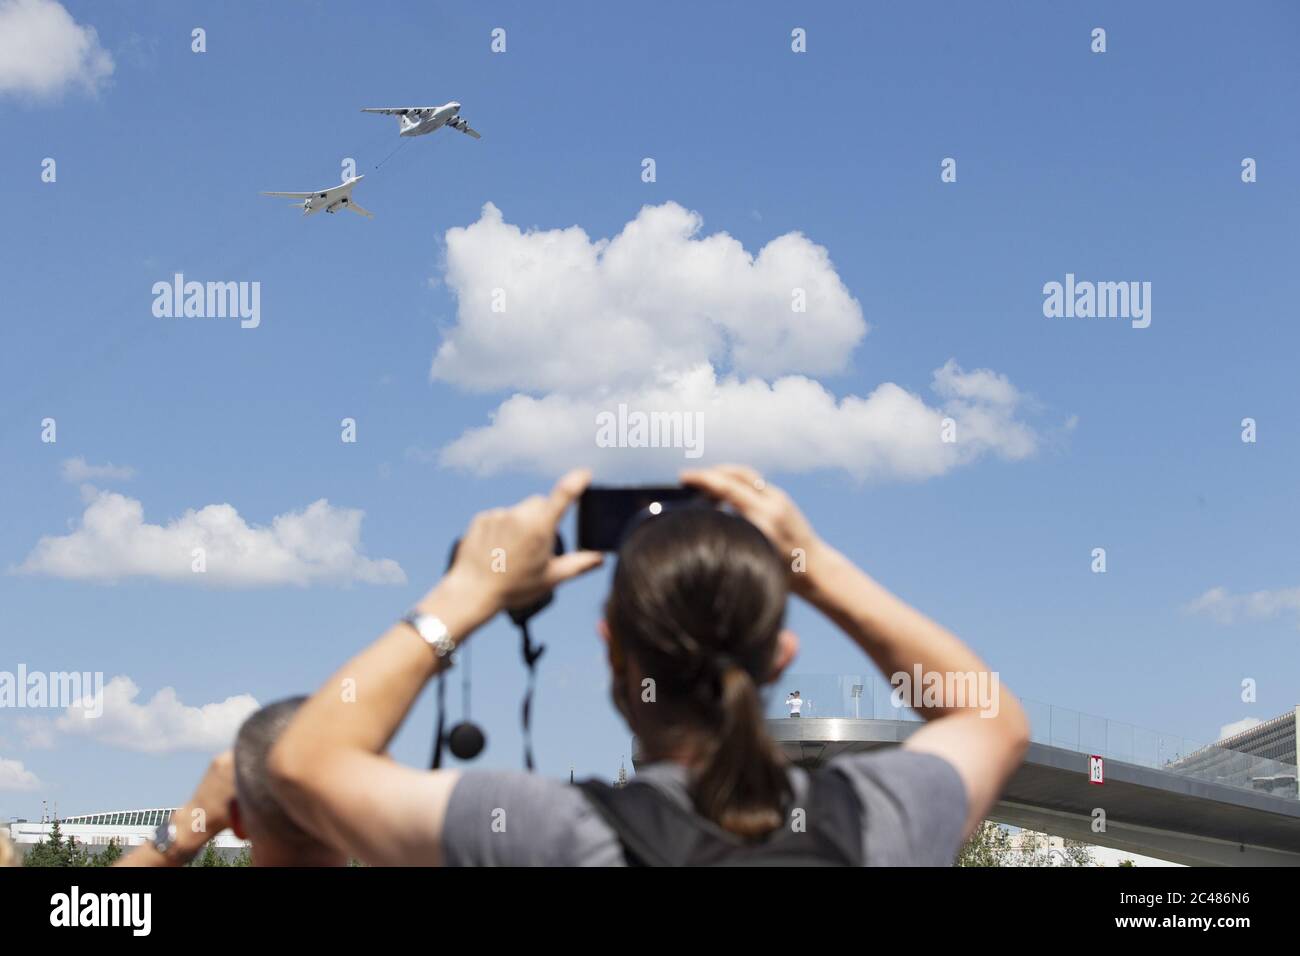 Moscow, Russia. 24th June, 2020. People watch an Il-78 air tanker and a Tu-160 strategic bomber flying over the Red Square during the military parade marking the 75th anniversary of the victory in the Great Patriotic War in Moscow, Russia, on June 24, 2020. Credit: Alexander Zemlianichenko Jr/Xinhua/Alamy Live News Stock Photo